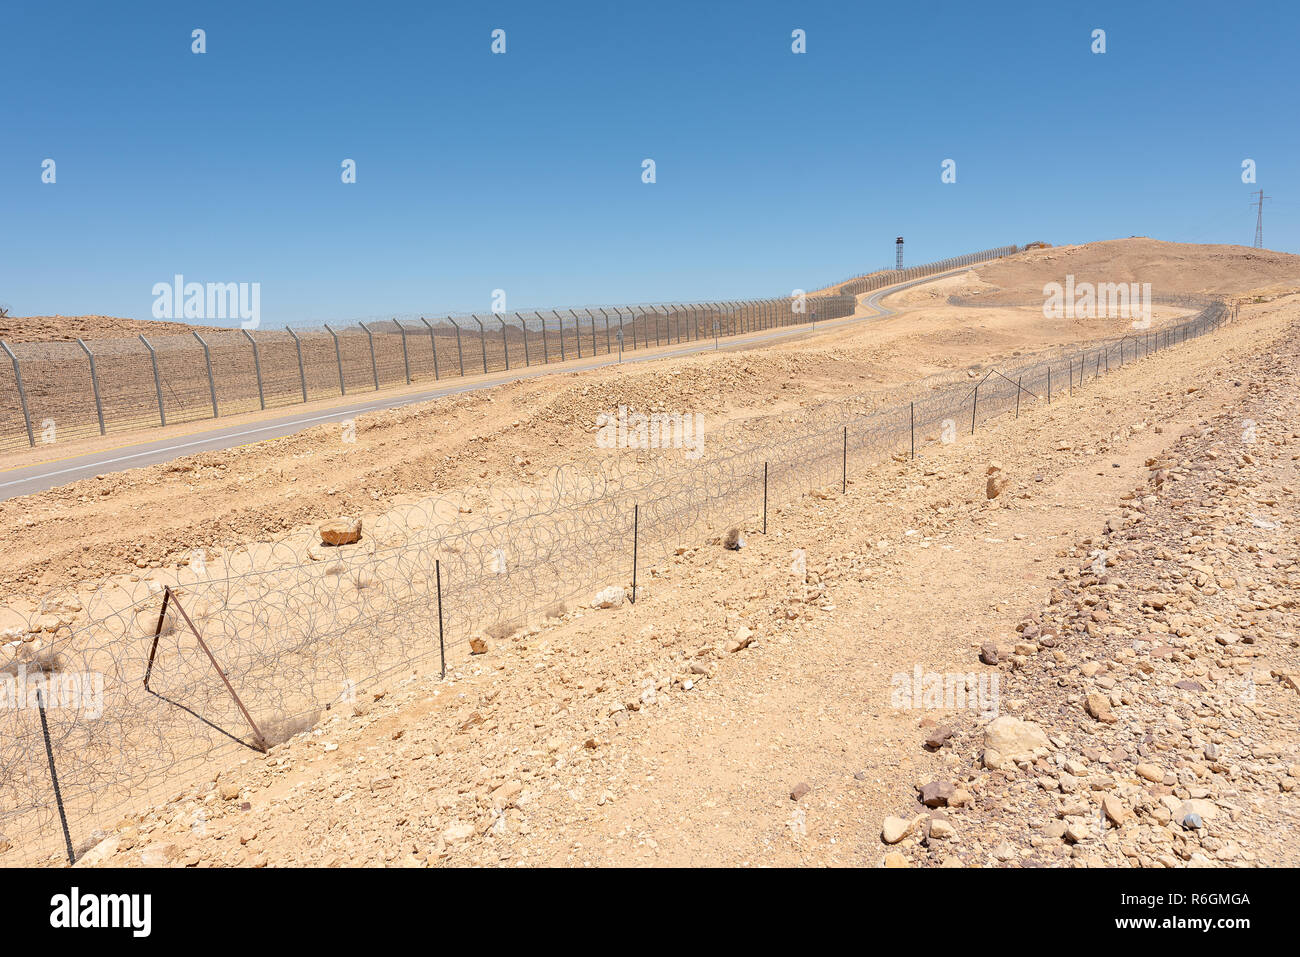 Israel Egypt border fence in the Negev and Sinai deserts Stock Photo